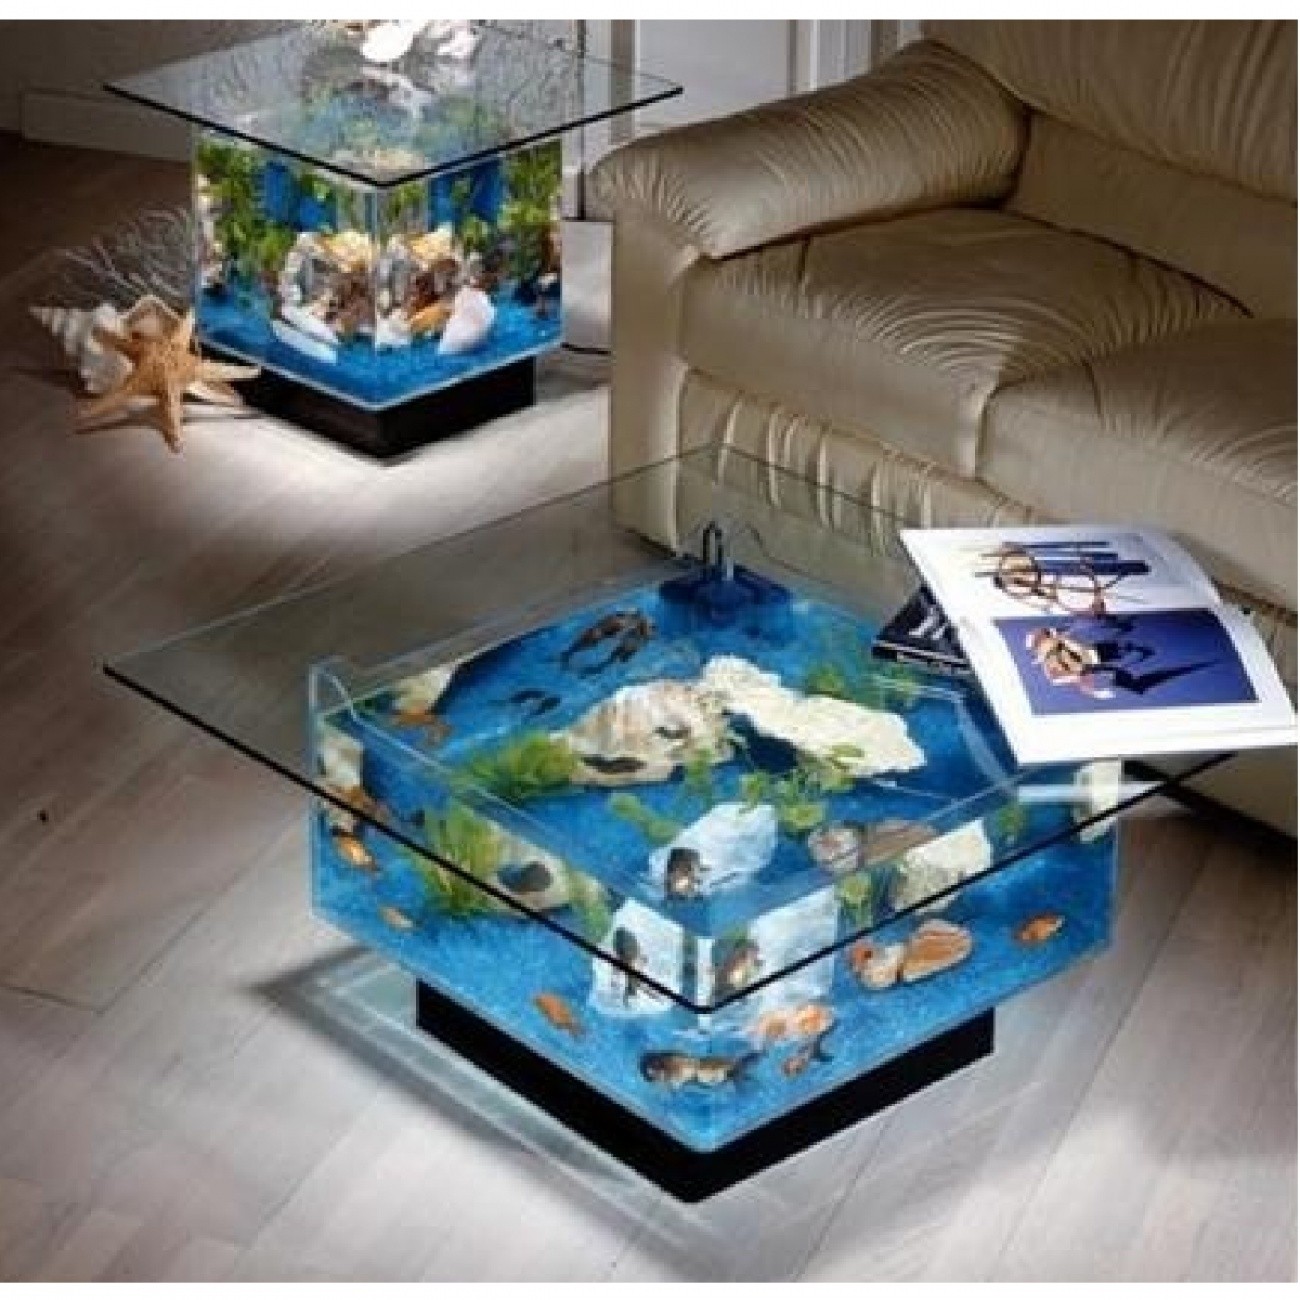 Unusual end tables